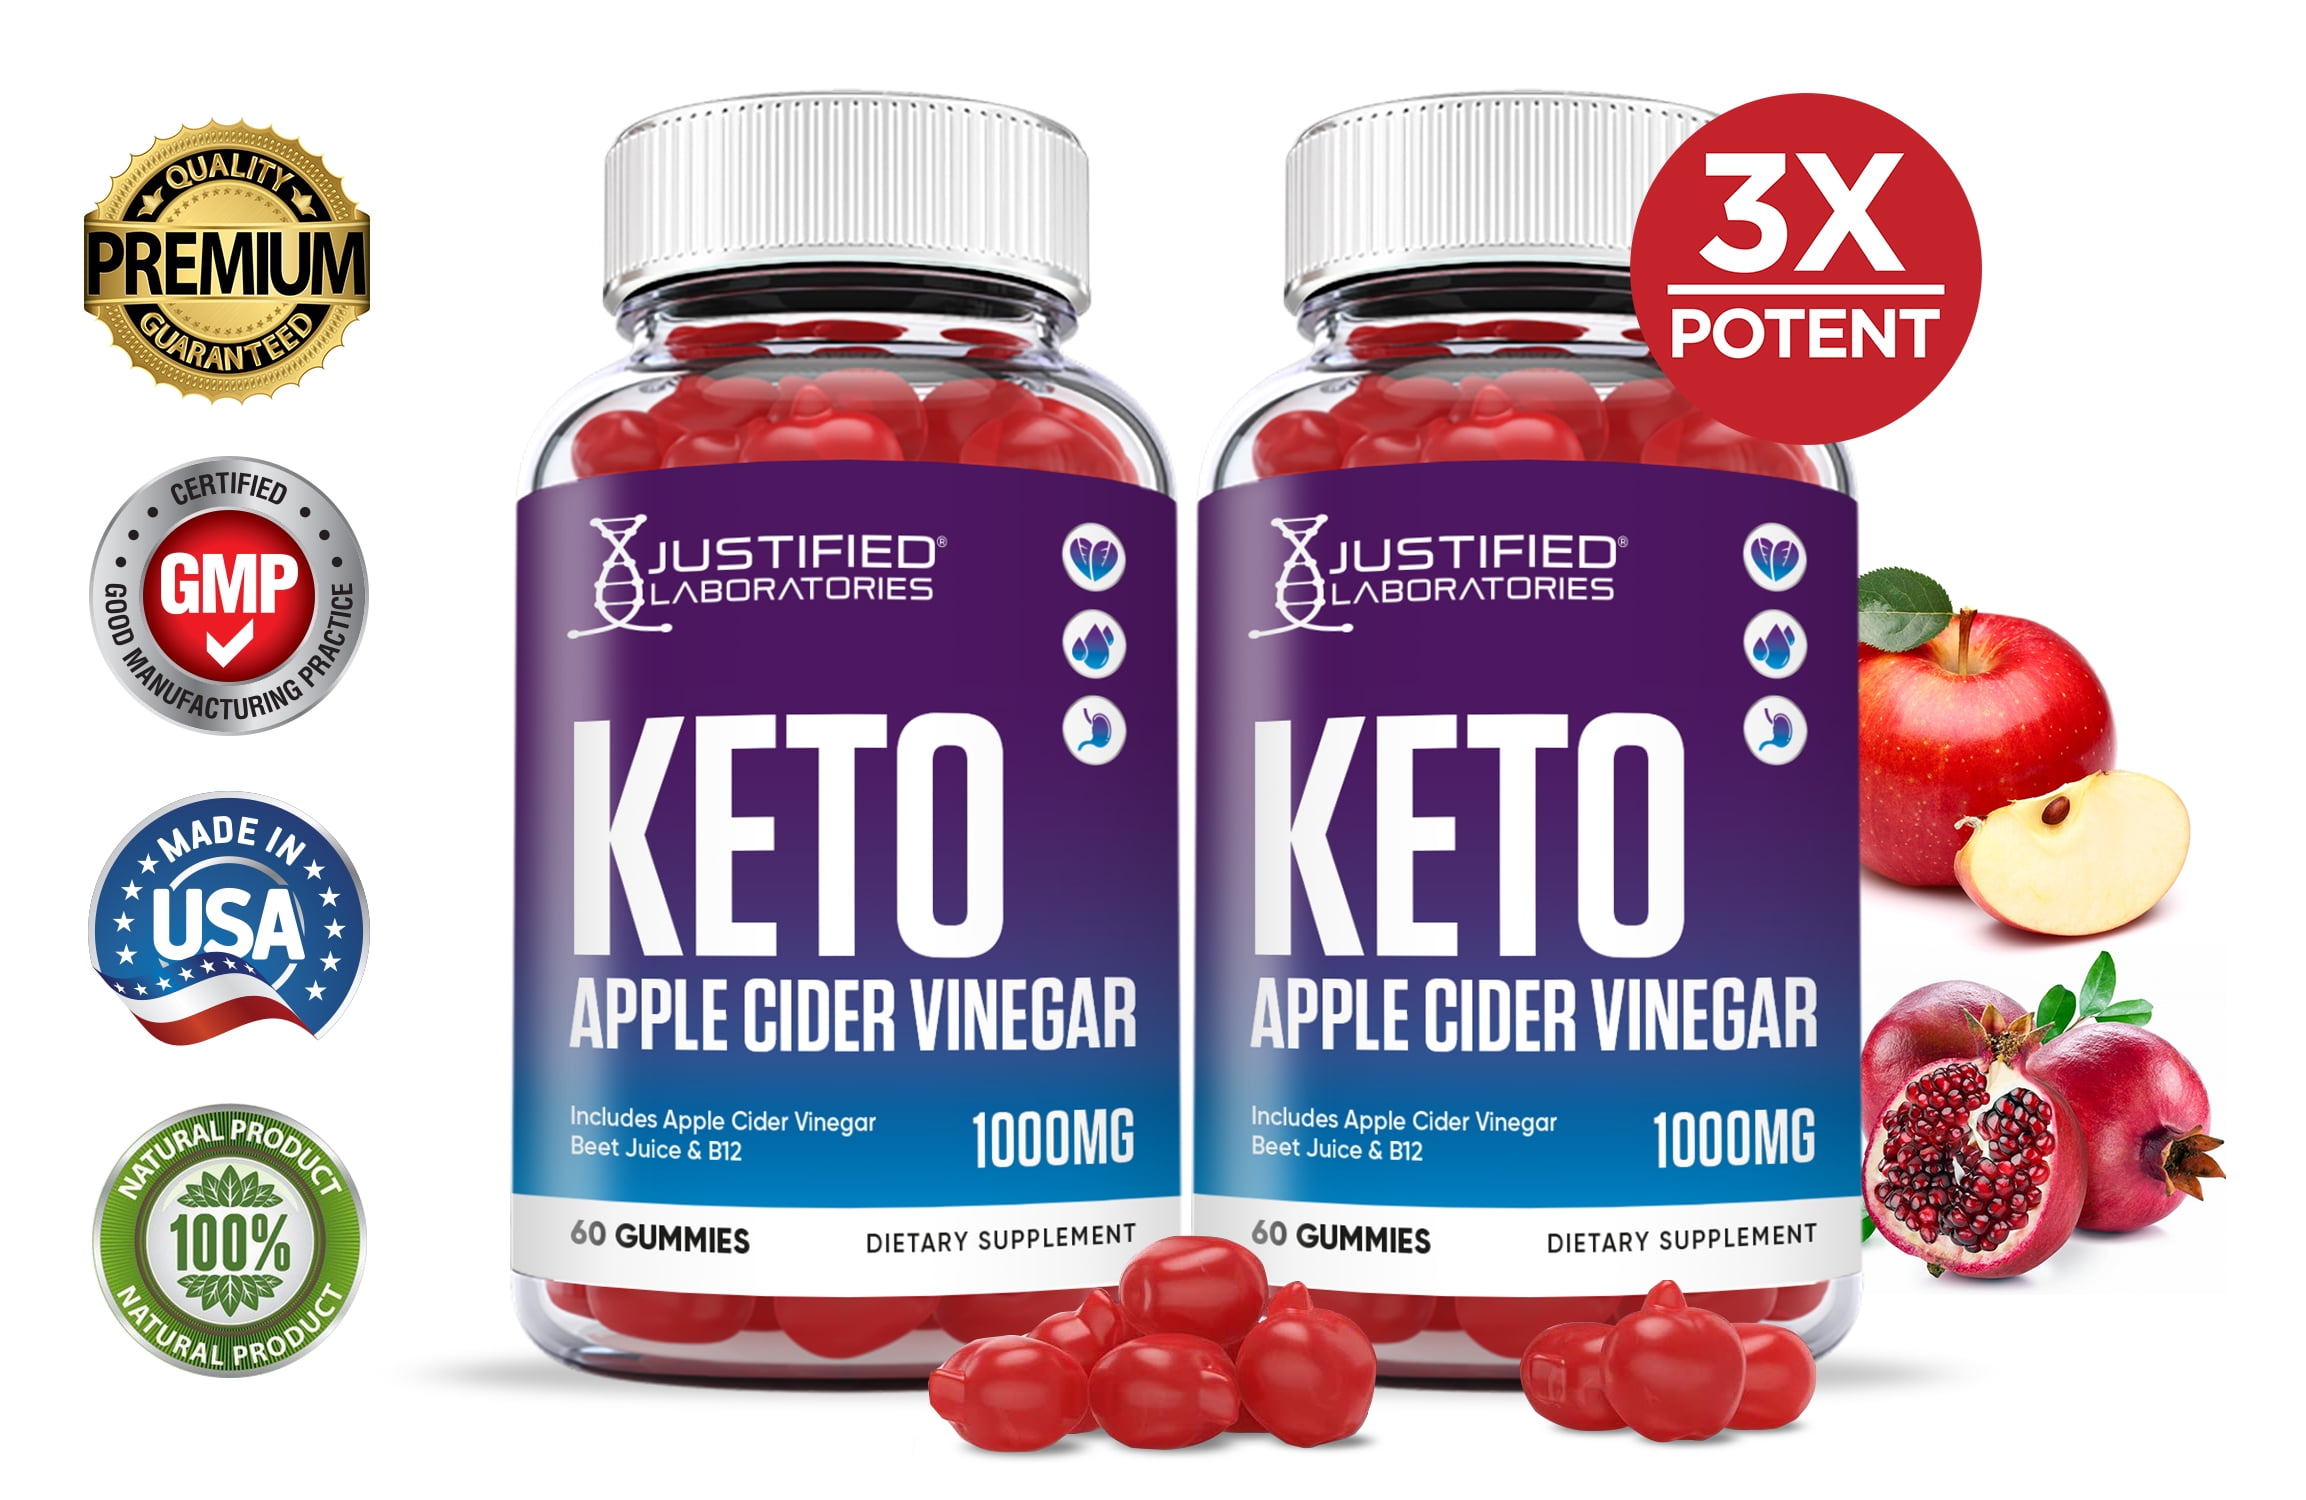 Keto Apple Cider Vinegar Gummies 1000MG ACV Made From The Mother with